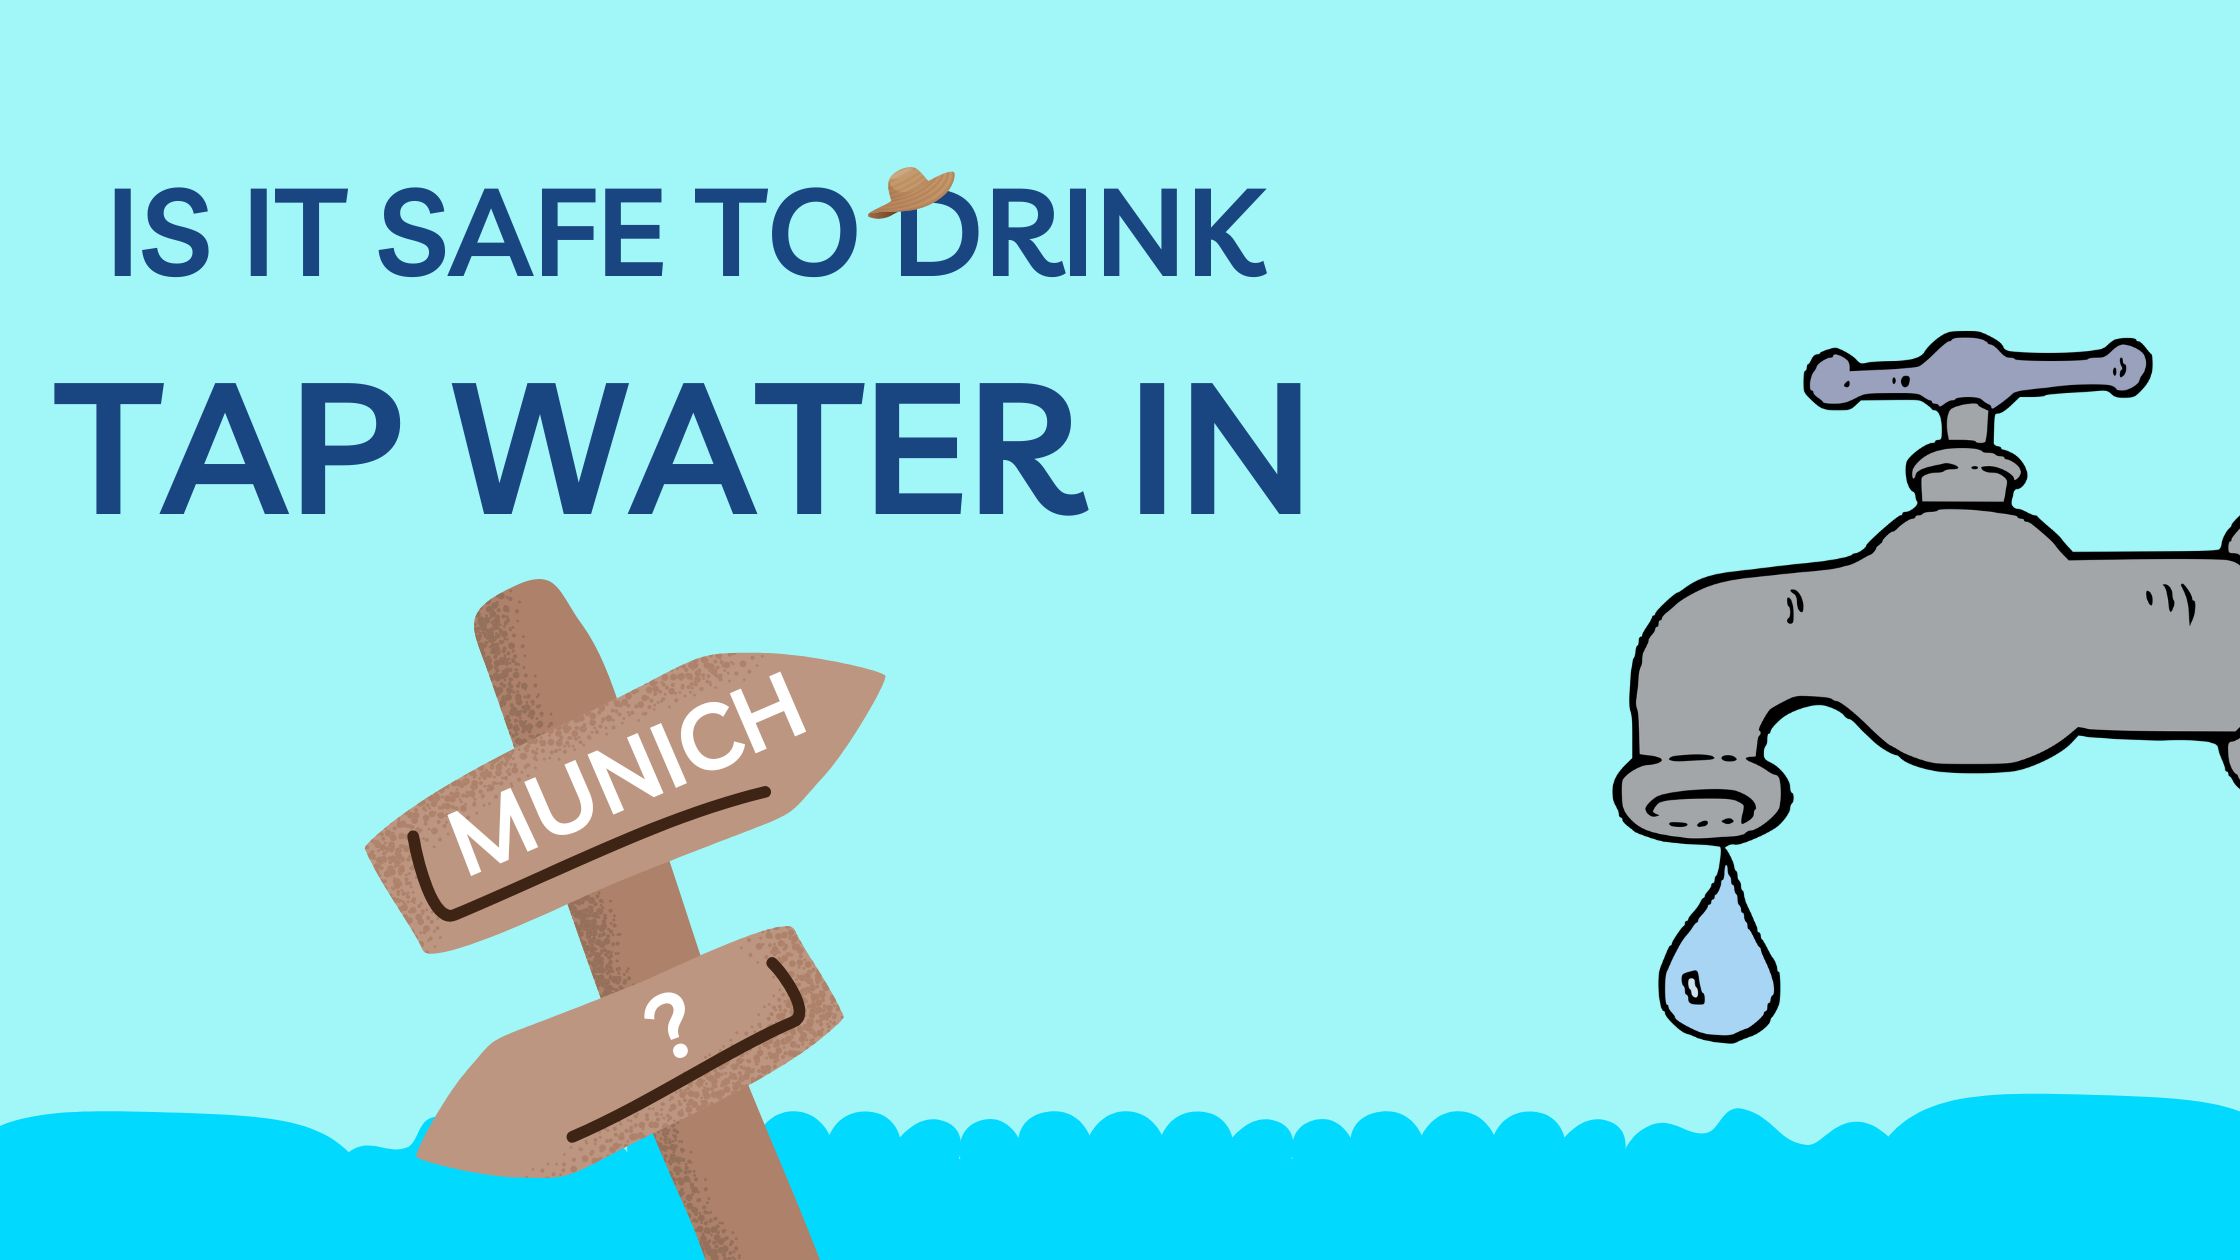 Is it safe to drink tap water in munich